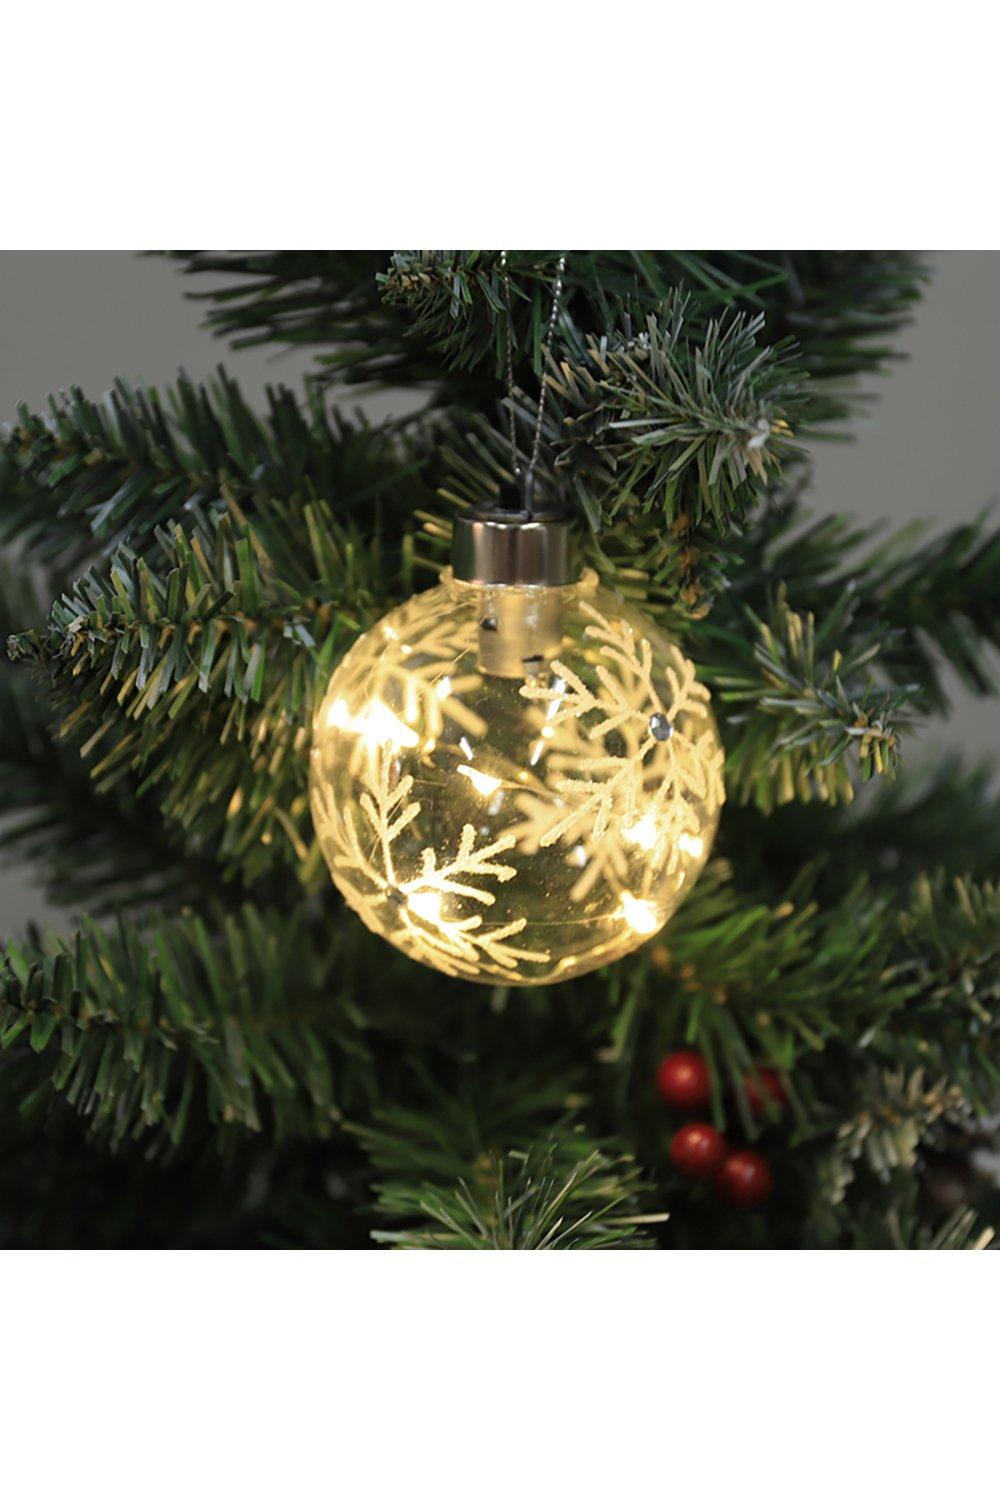 Set of 6 Clear Snowflakes Ball Christmas Glass LED Light Hanging Ornaments